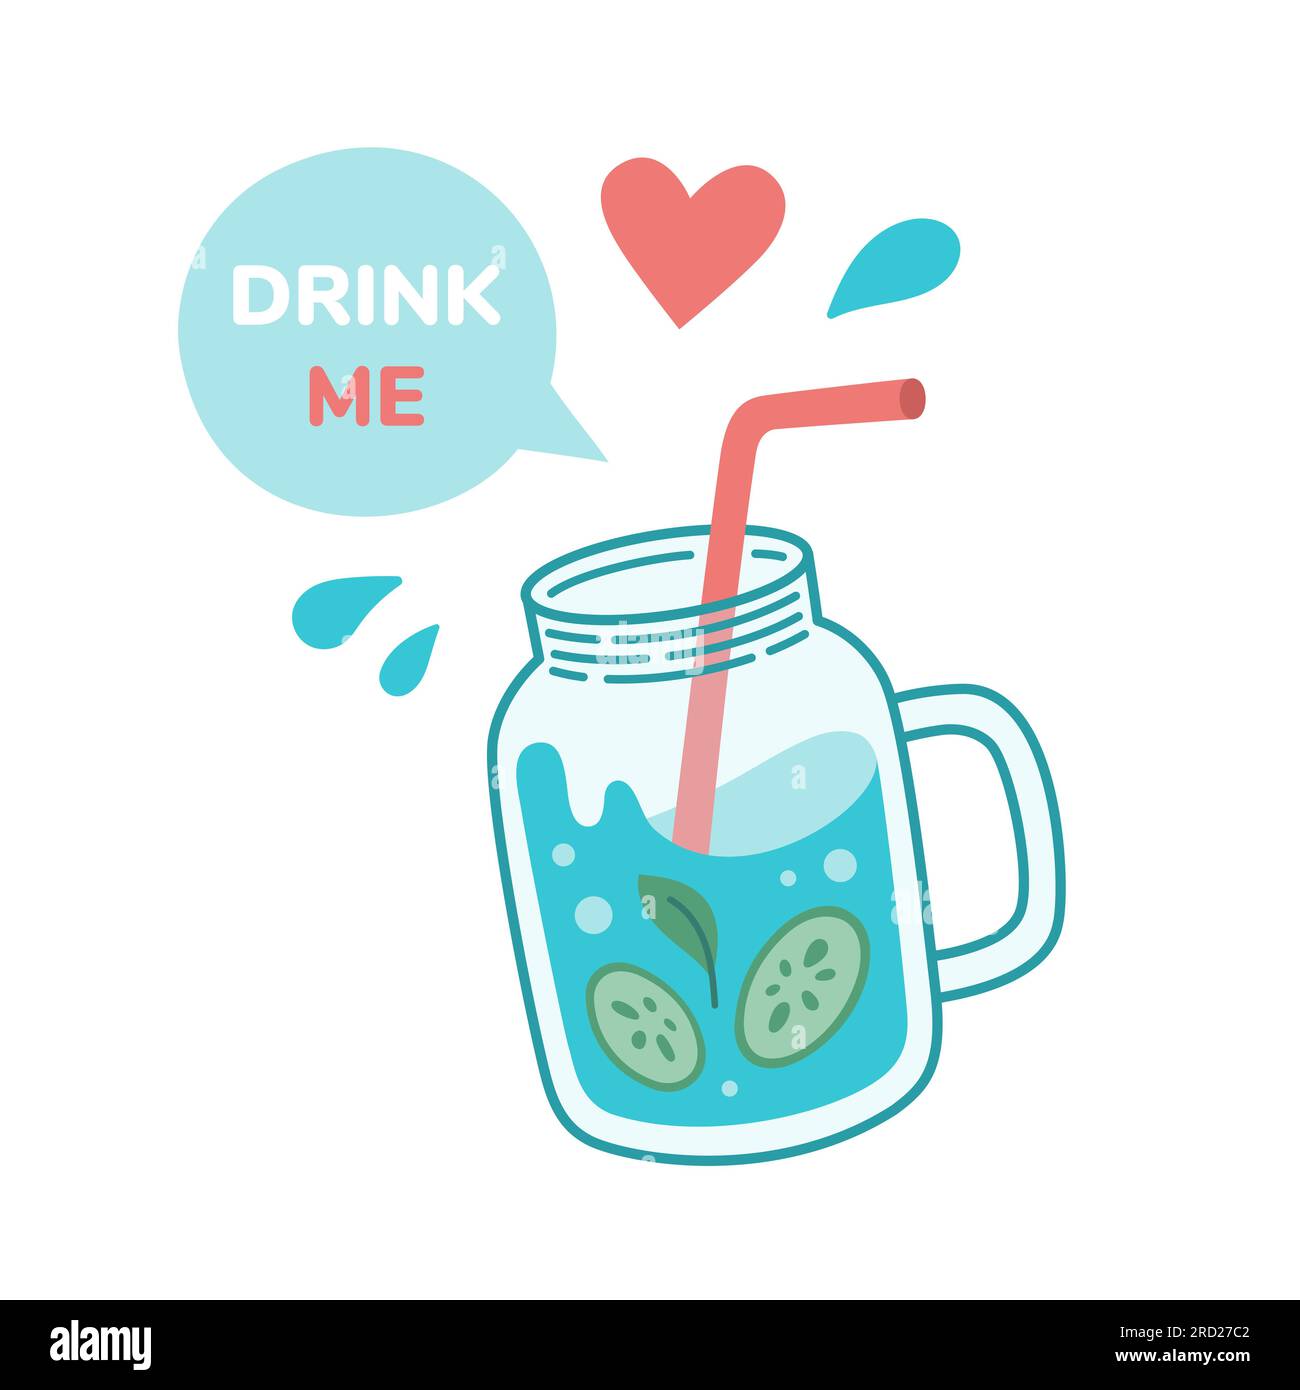 https://c8.alamy.com/comp/2RD27C2/reusable-glass-jar-with-text-drink-me-sustainable-lifestyle-zero-waste-ecological-concept-vector-illustration-in-cartoon-style-recycling-waste-management-ecology-sustainability-2RD27C2.jpg